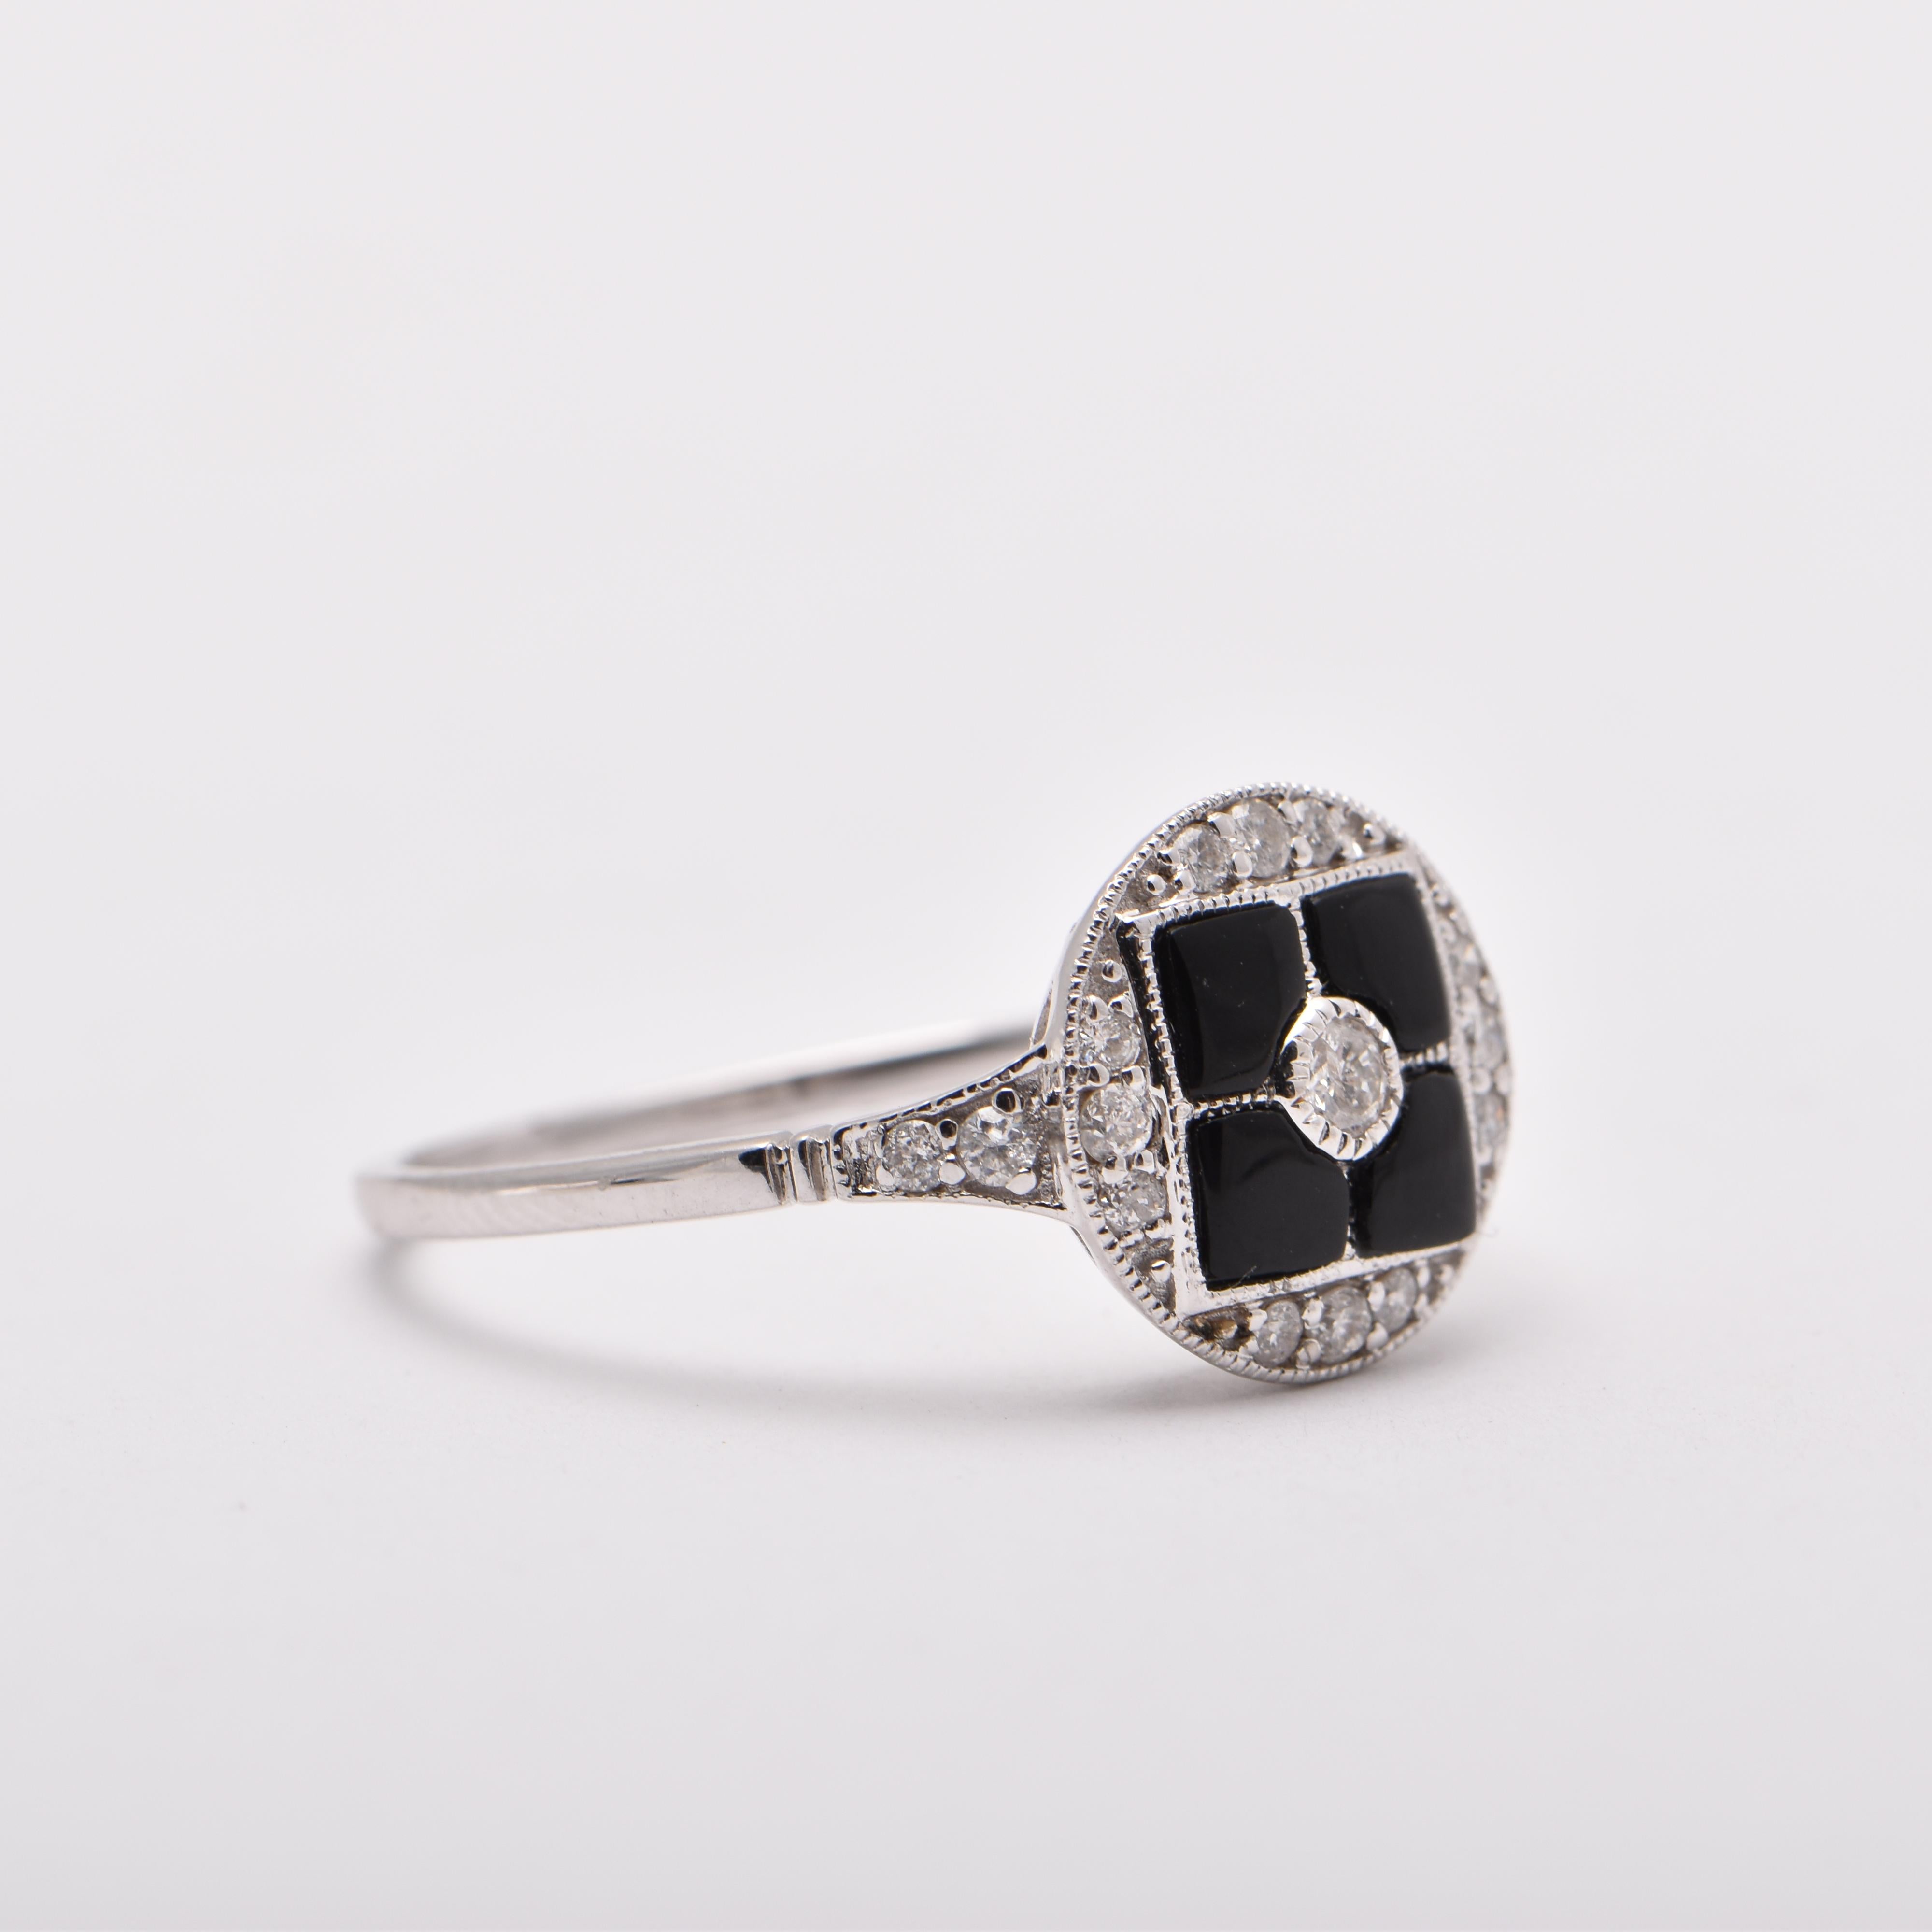 Onyx and Diamond Art Deco Style Ring in 18 Carat White Gold by Cartmer Jewellery

Size O

Onyx totalling 0.55 Carats
17 Diamonds totalling 0.24 Carats
18 Carat White Gold Ring

FREE express postage usually 3-4 days Sydney to New York
FREE